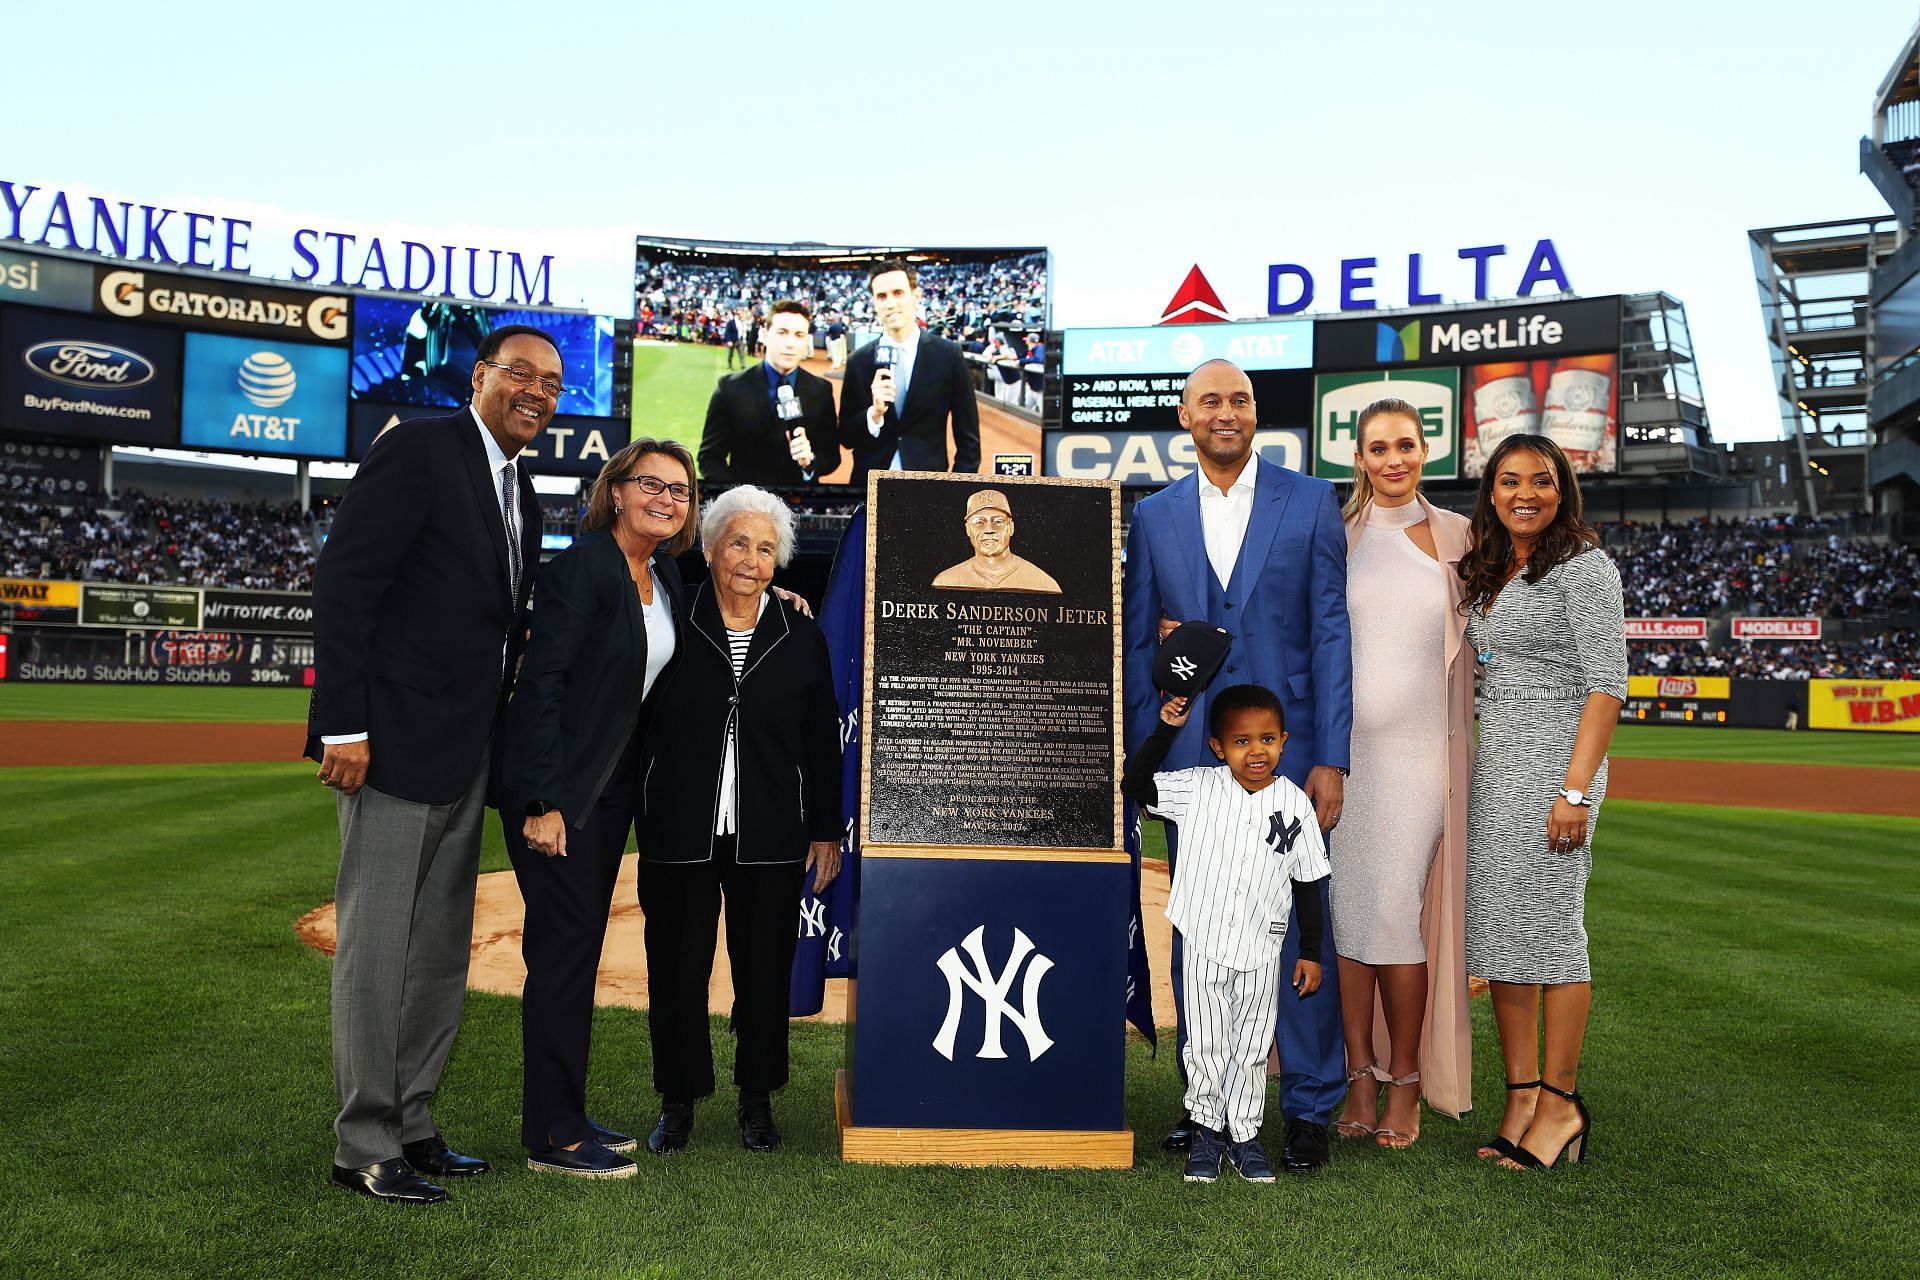 Derek Jeter poses with his family during the retirement ceremony of his number 2 jersey at Yankee Stadium on May 14, 2017 in New York City.